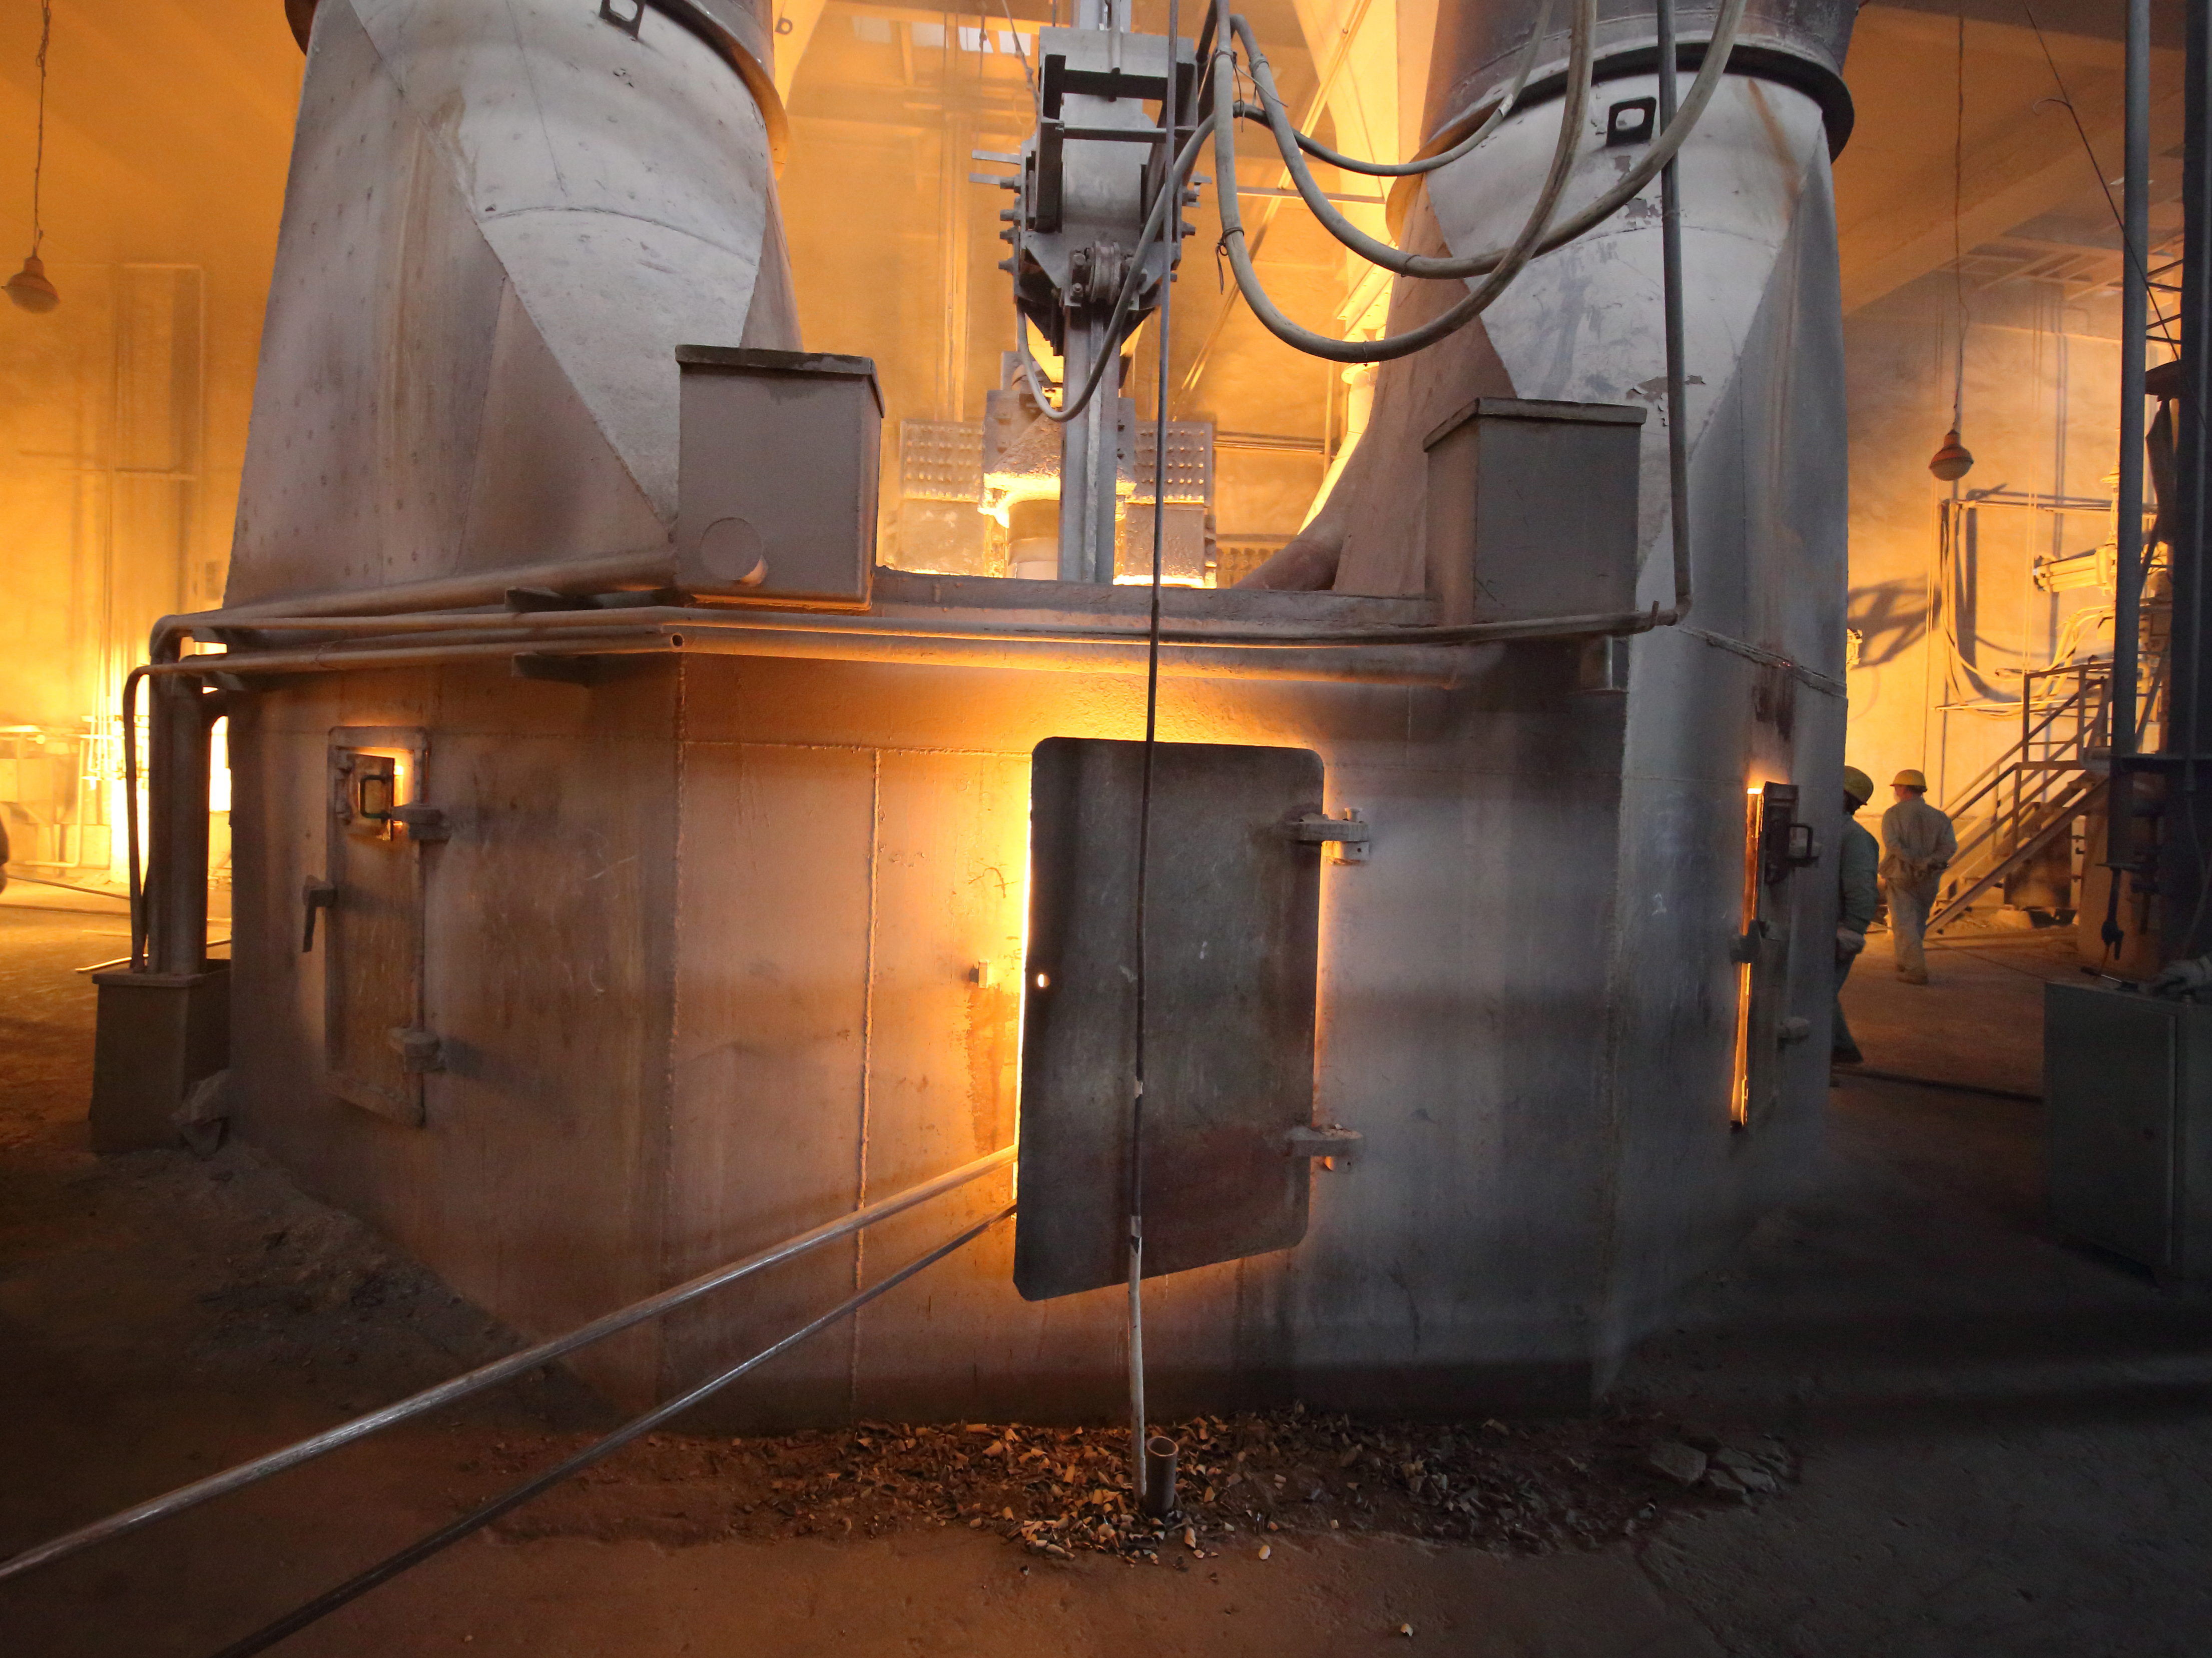 The temperature inside furnace is as high as 1300 deg. C. All raw materials are melted, reacted and form another mineral crystal. This process is called fusing and it always takes some hours.